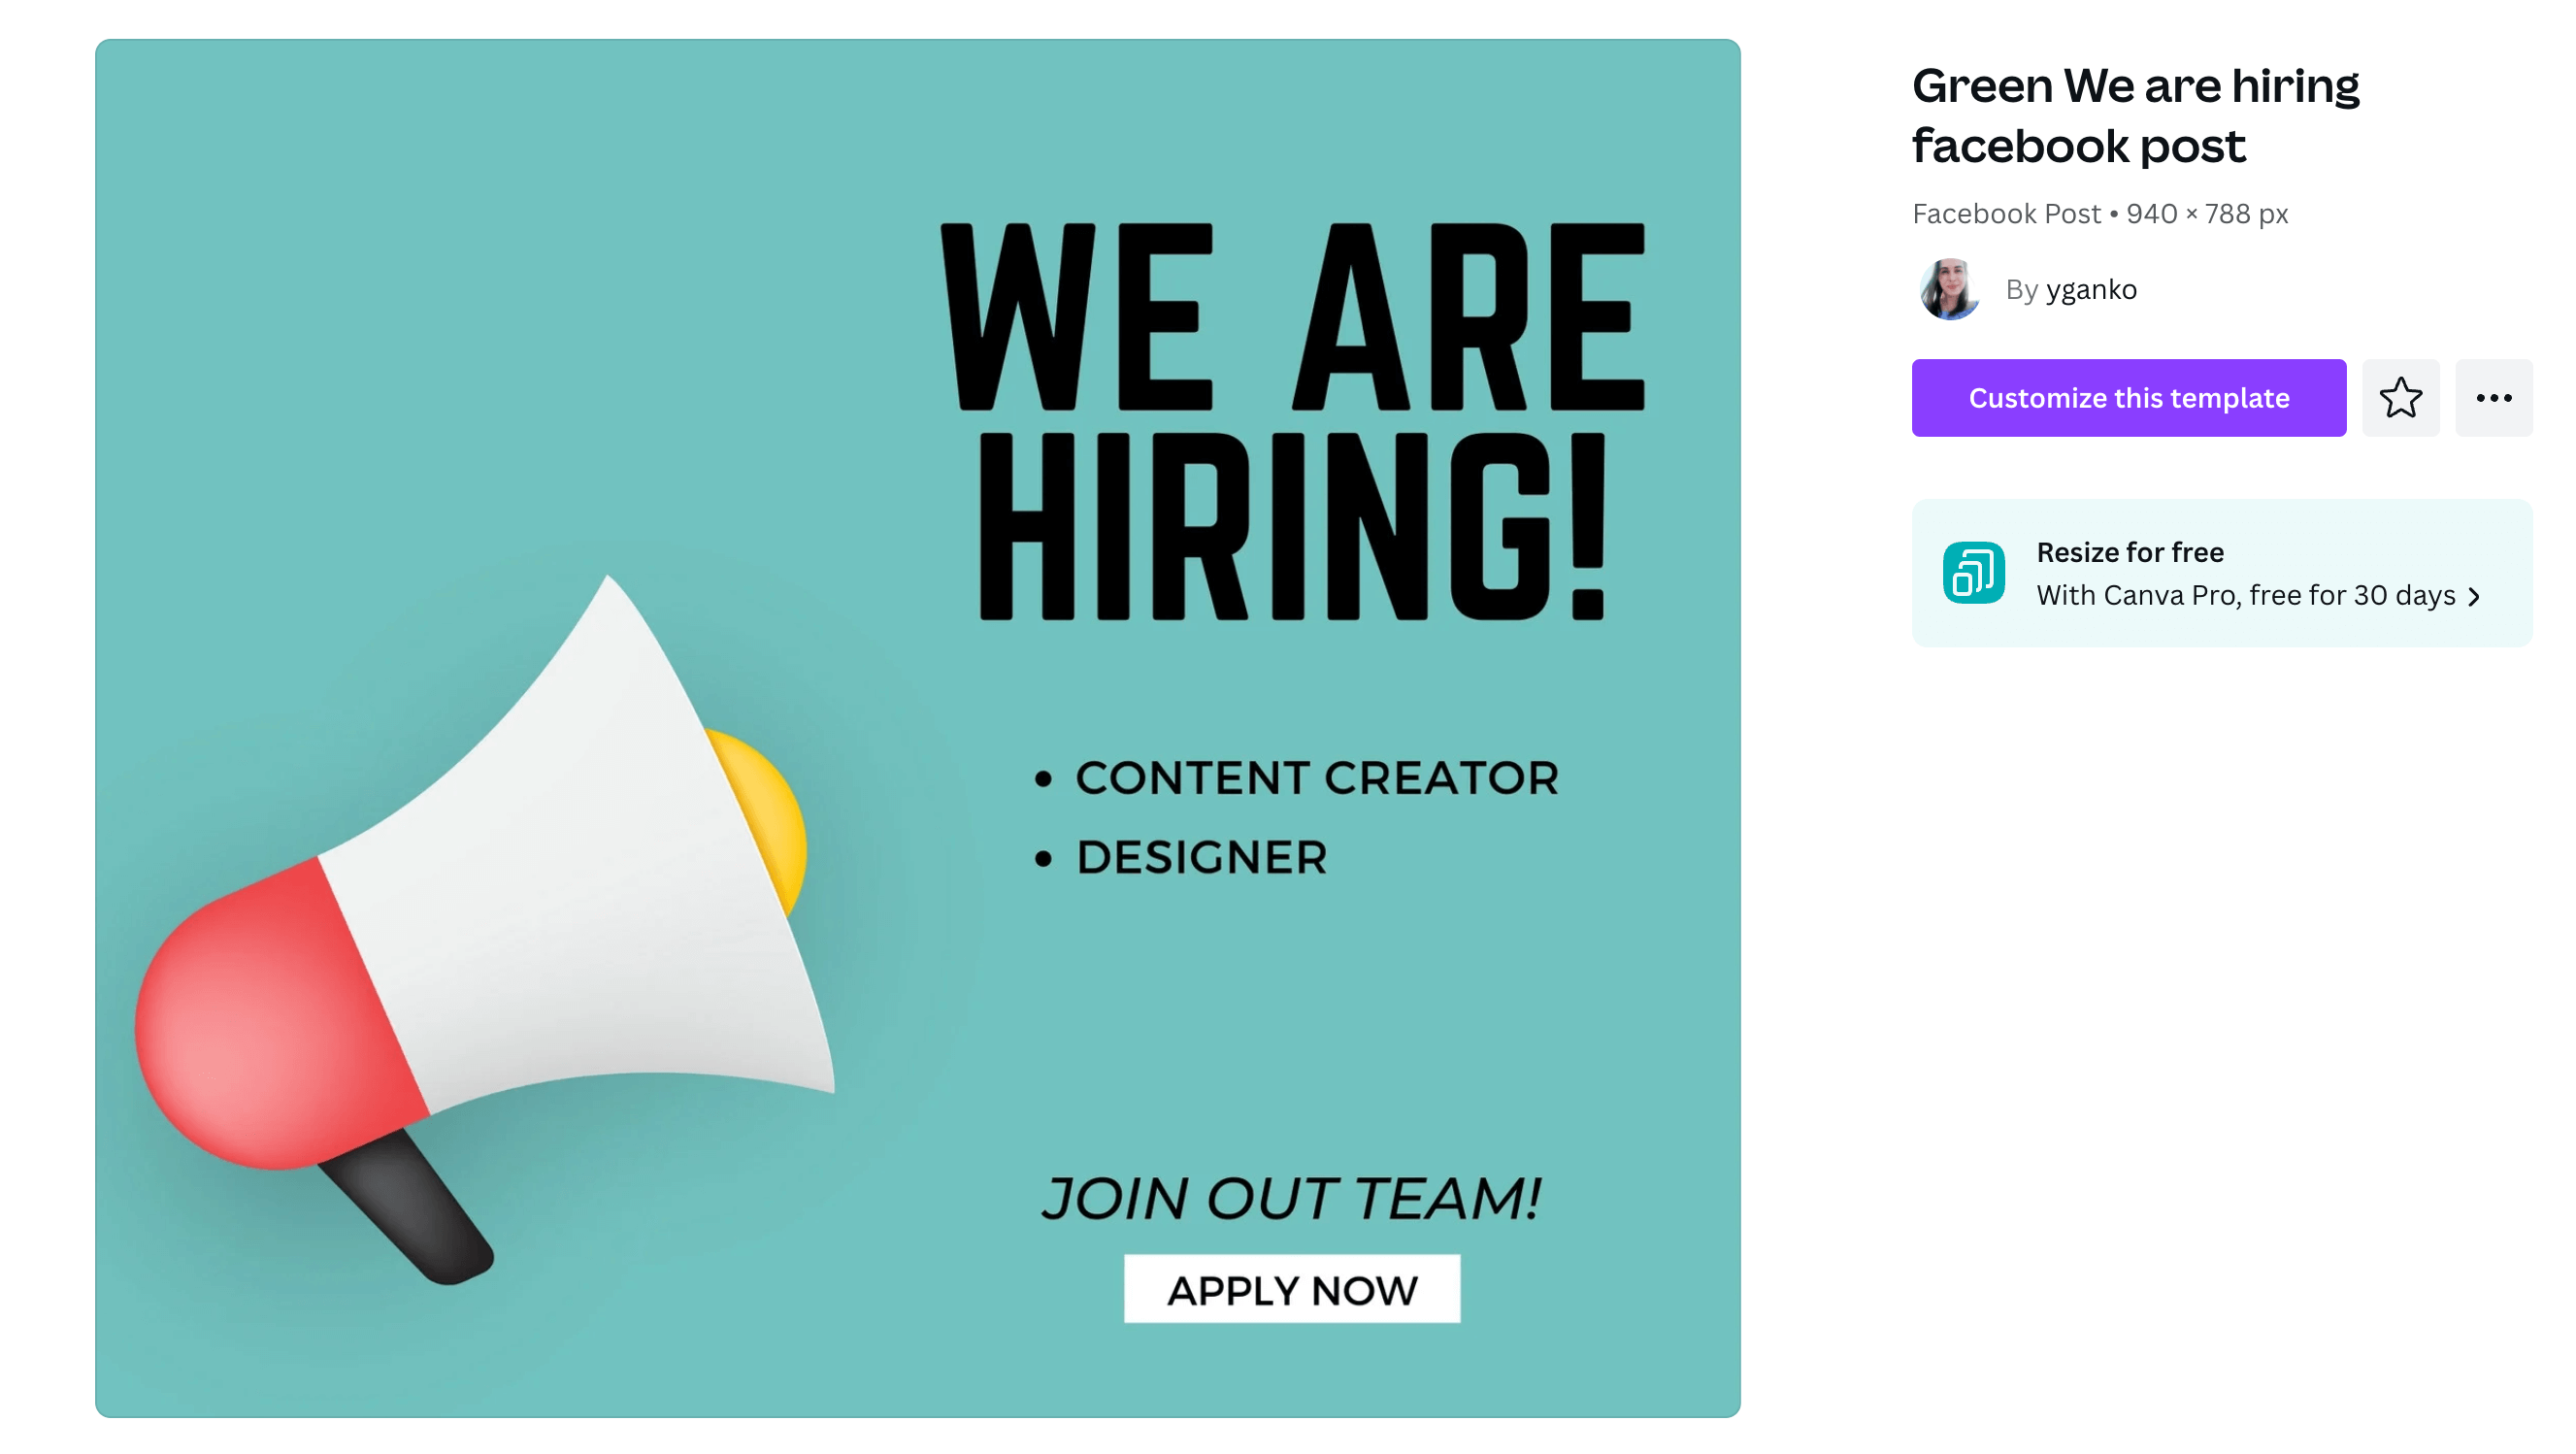 A "We Are Hiring!" Facebook post graphic with an illustration of a megaphone